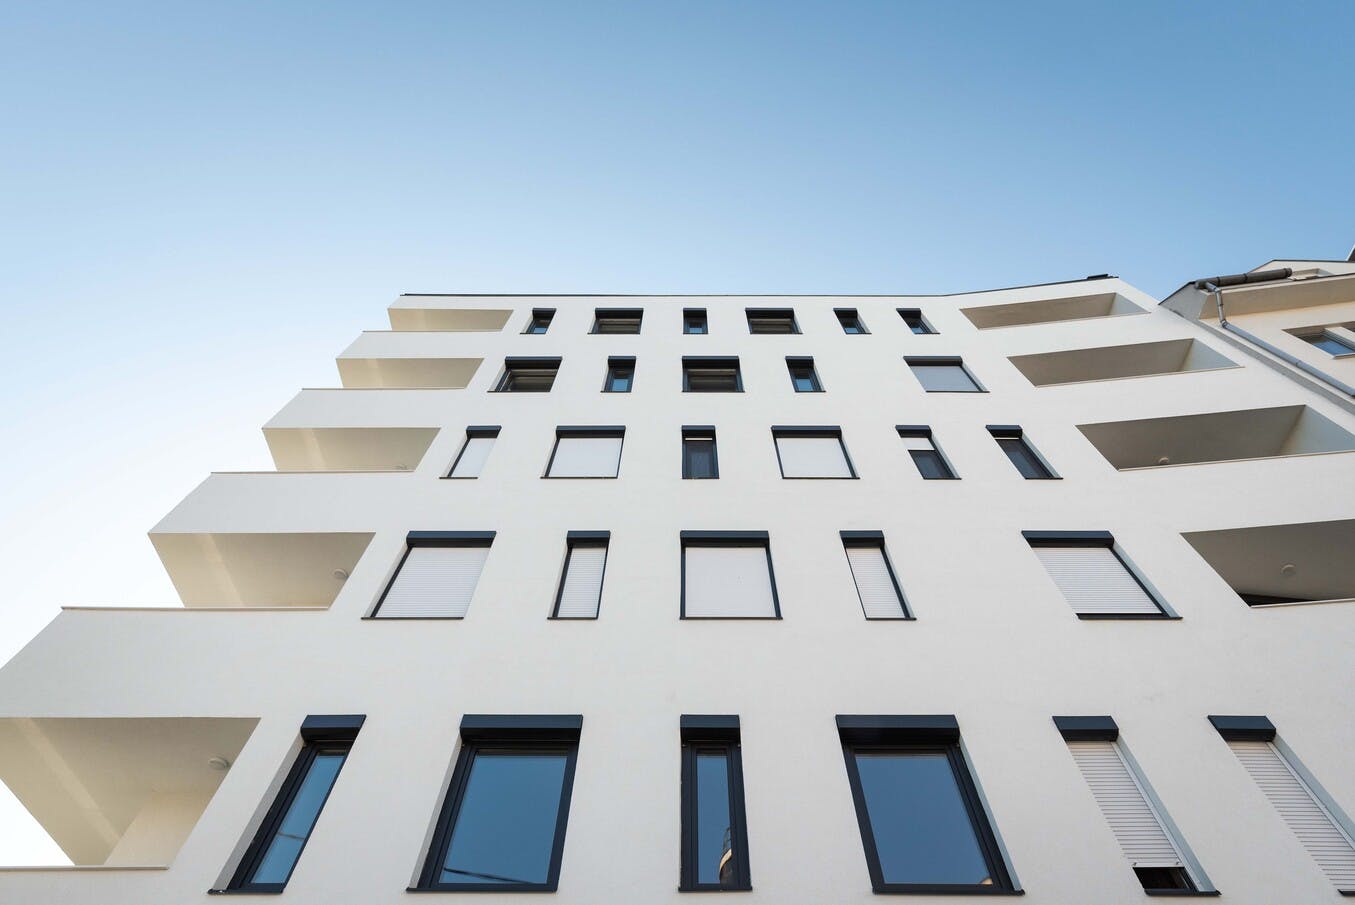 Equinox Founding Partner Bálint was the lead designer and project manager of this 35-unit apartment building in Budapest, Hungary.